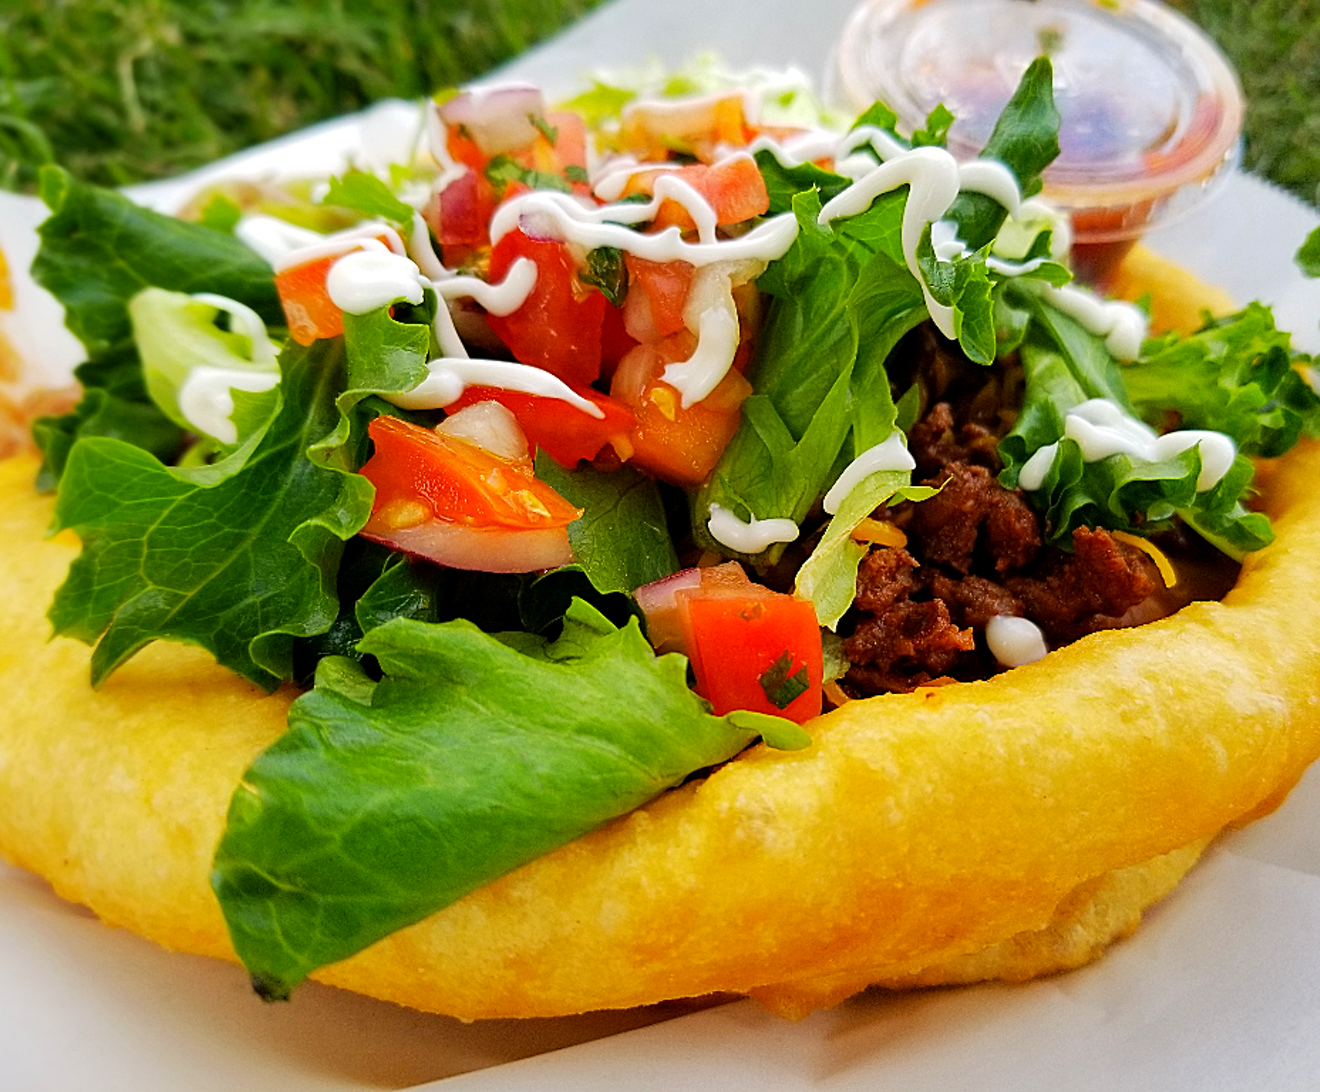 A jazzed-up fry bread from a popular Valley food truck.